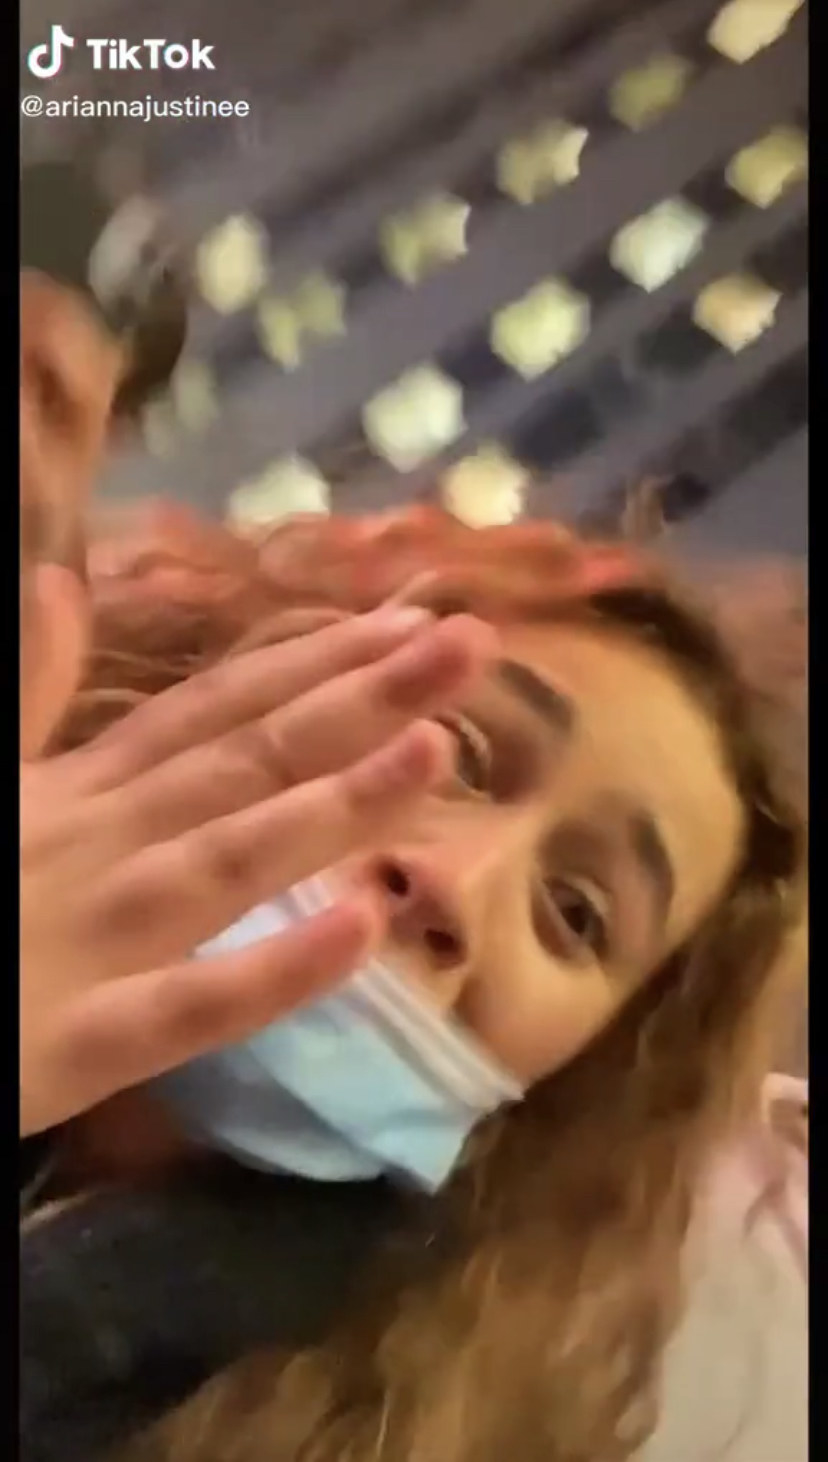 A fan holding up her hand, shocked